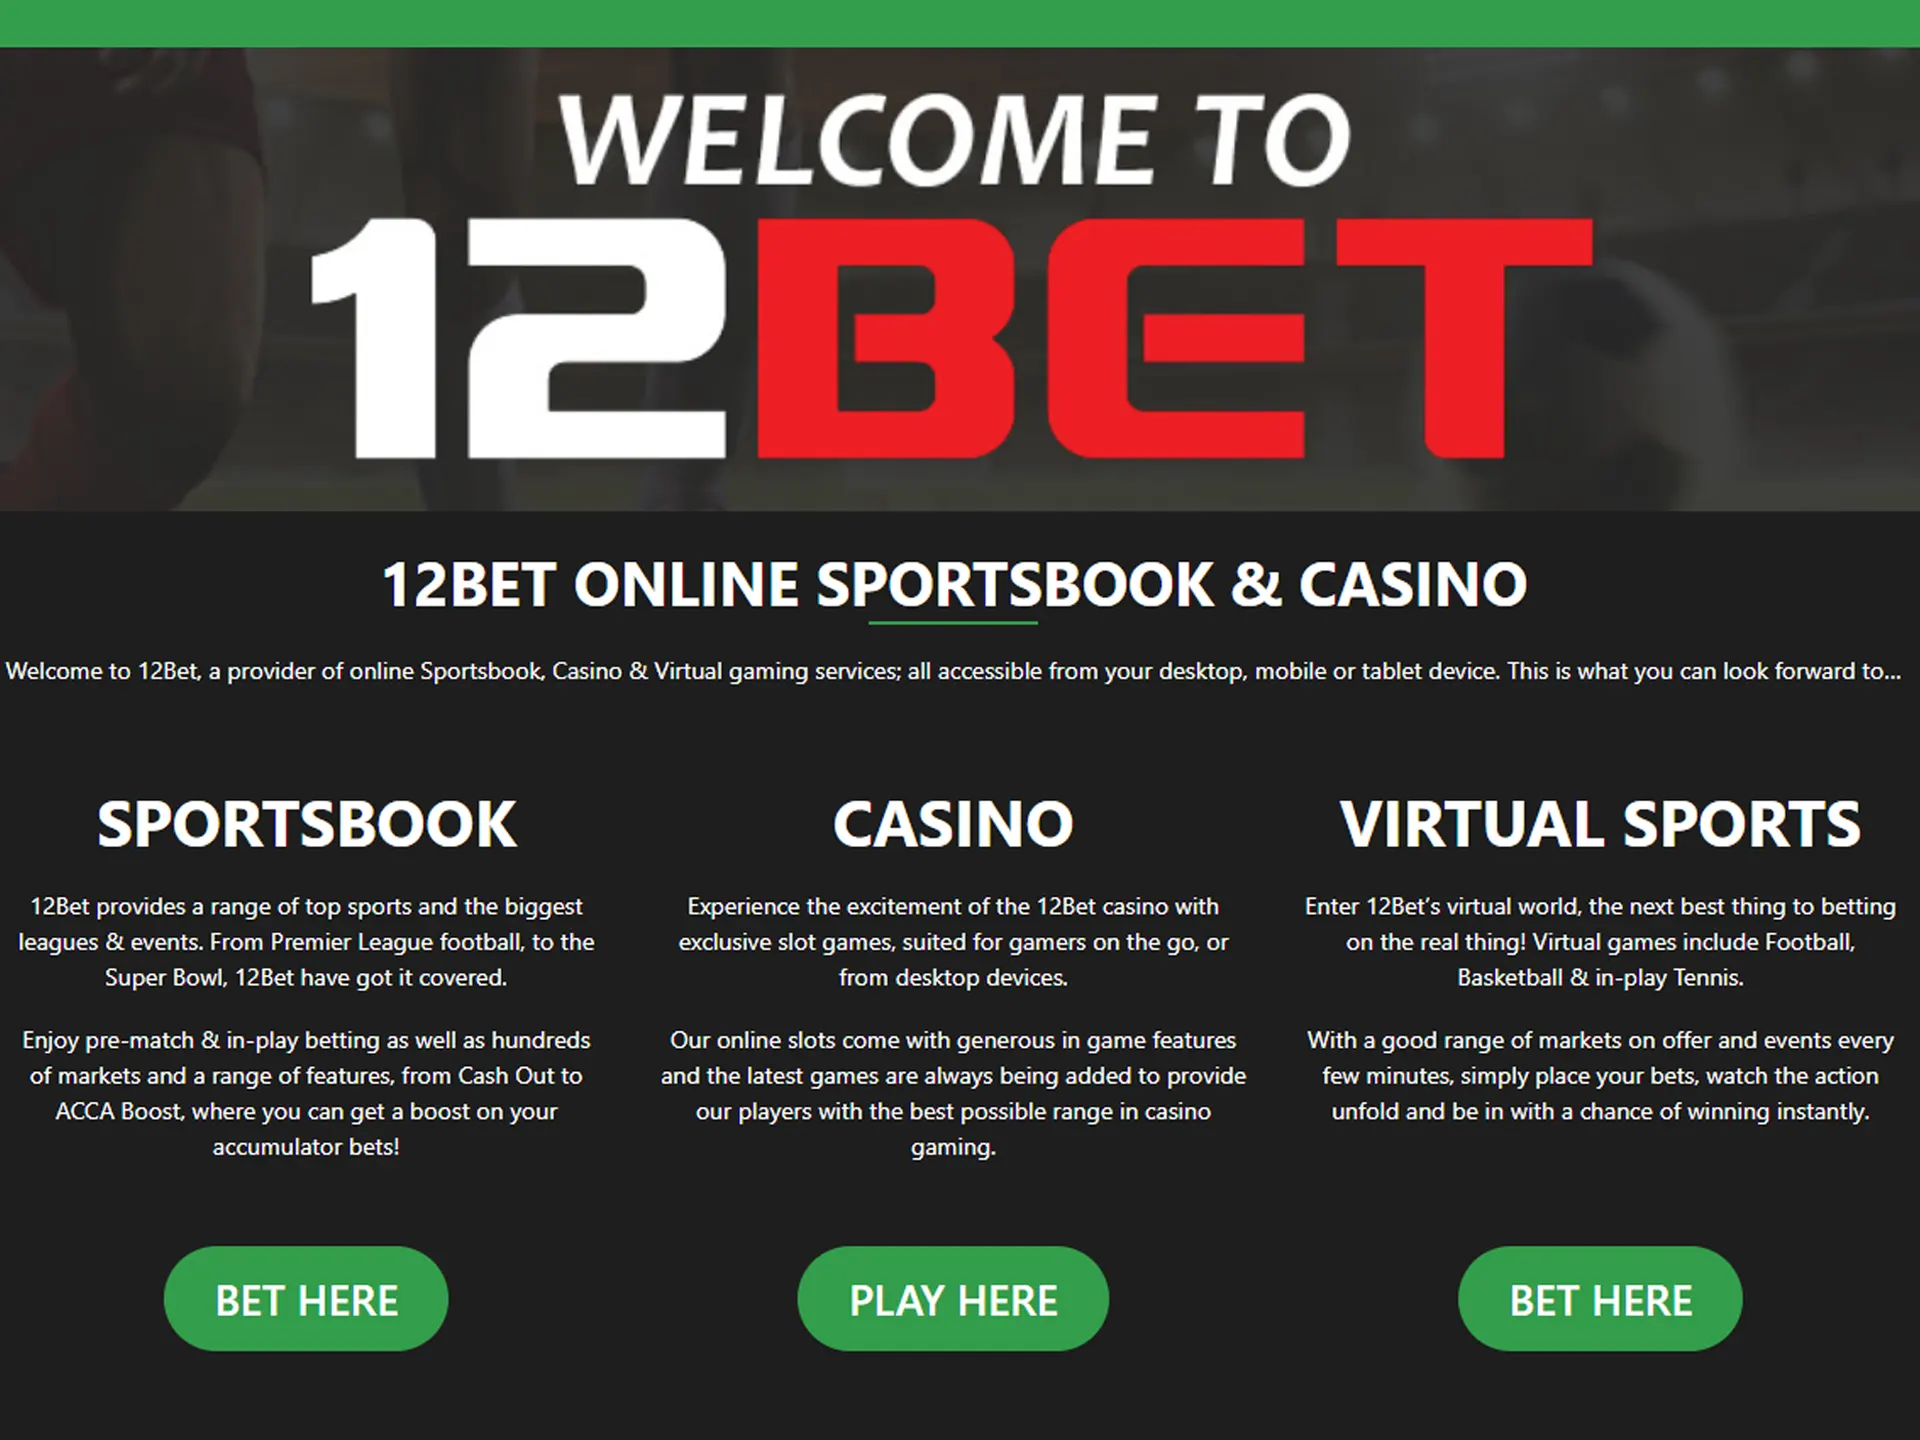 You are ready for betting and playing casino games.